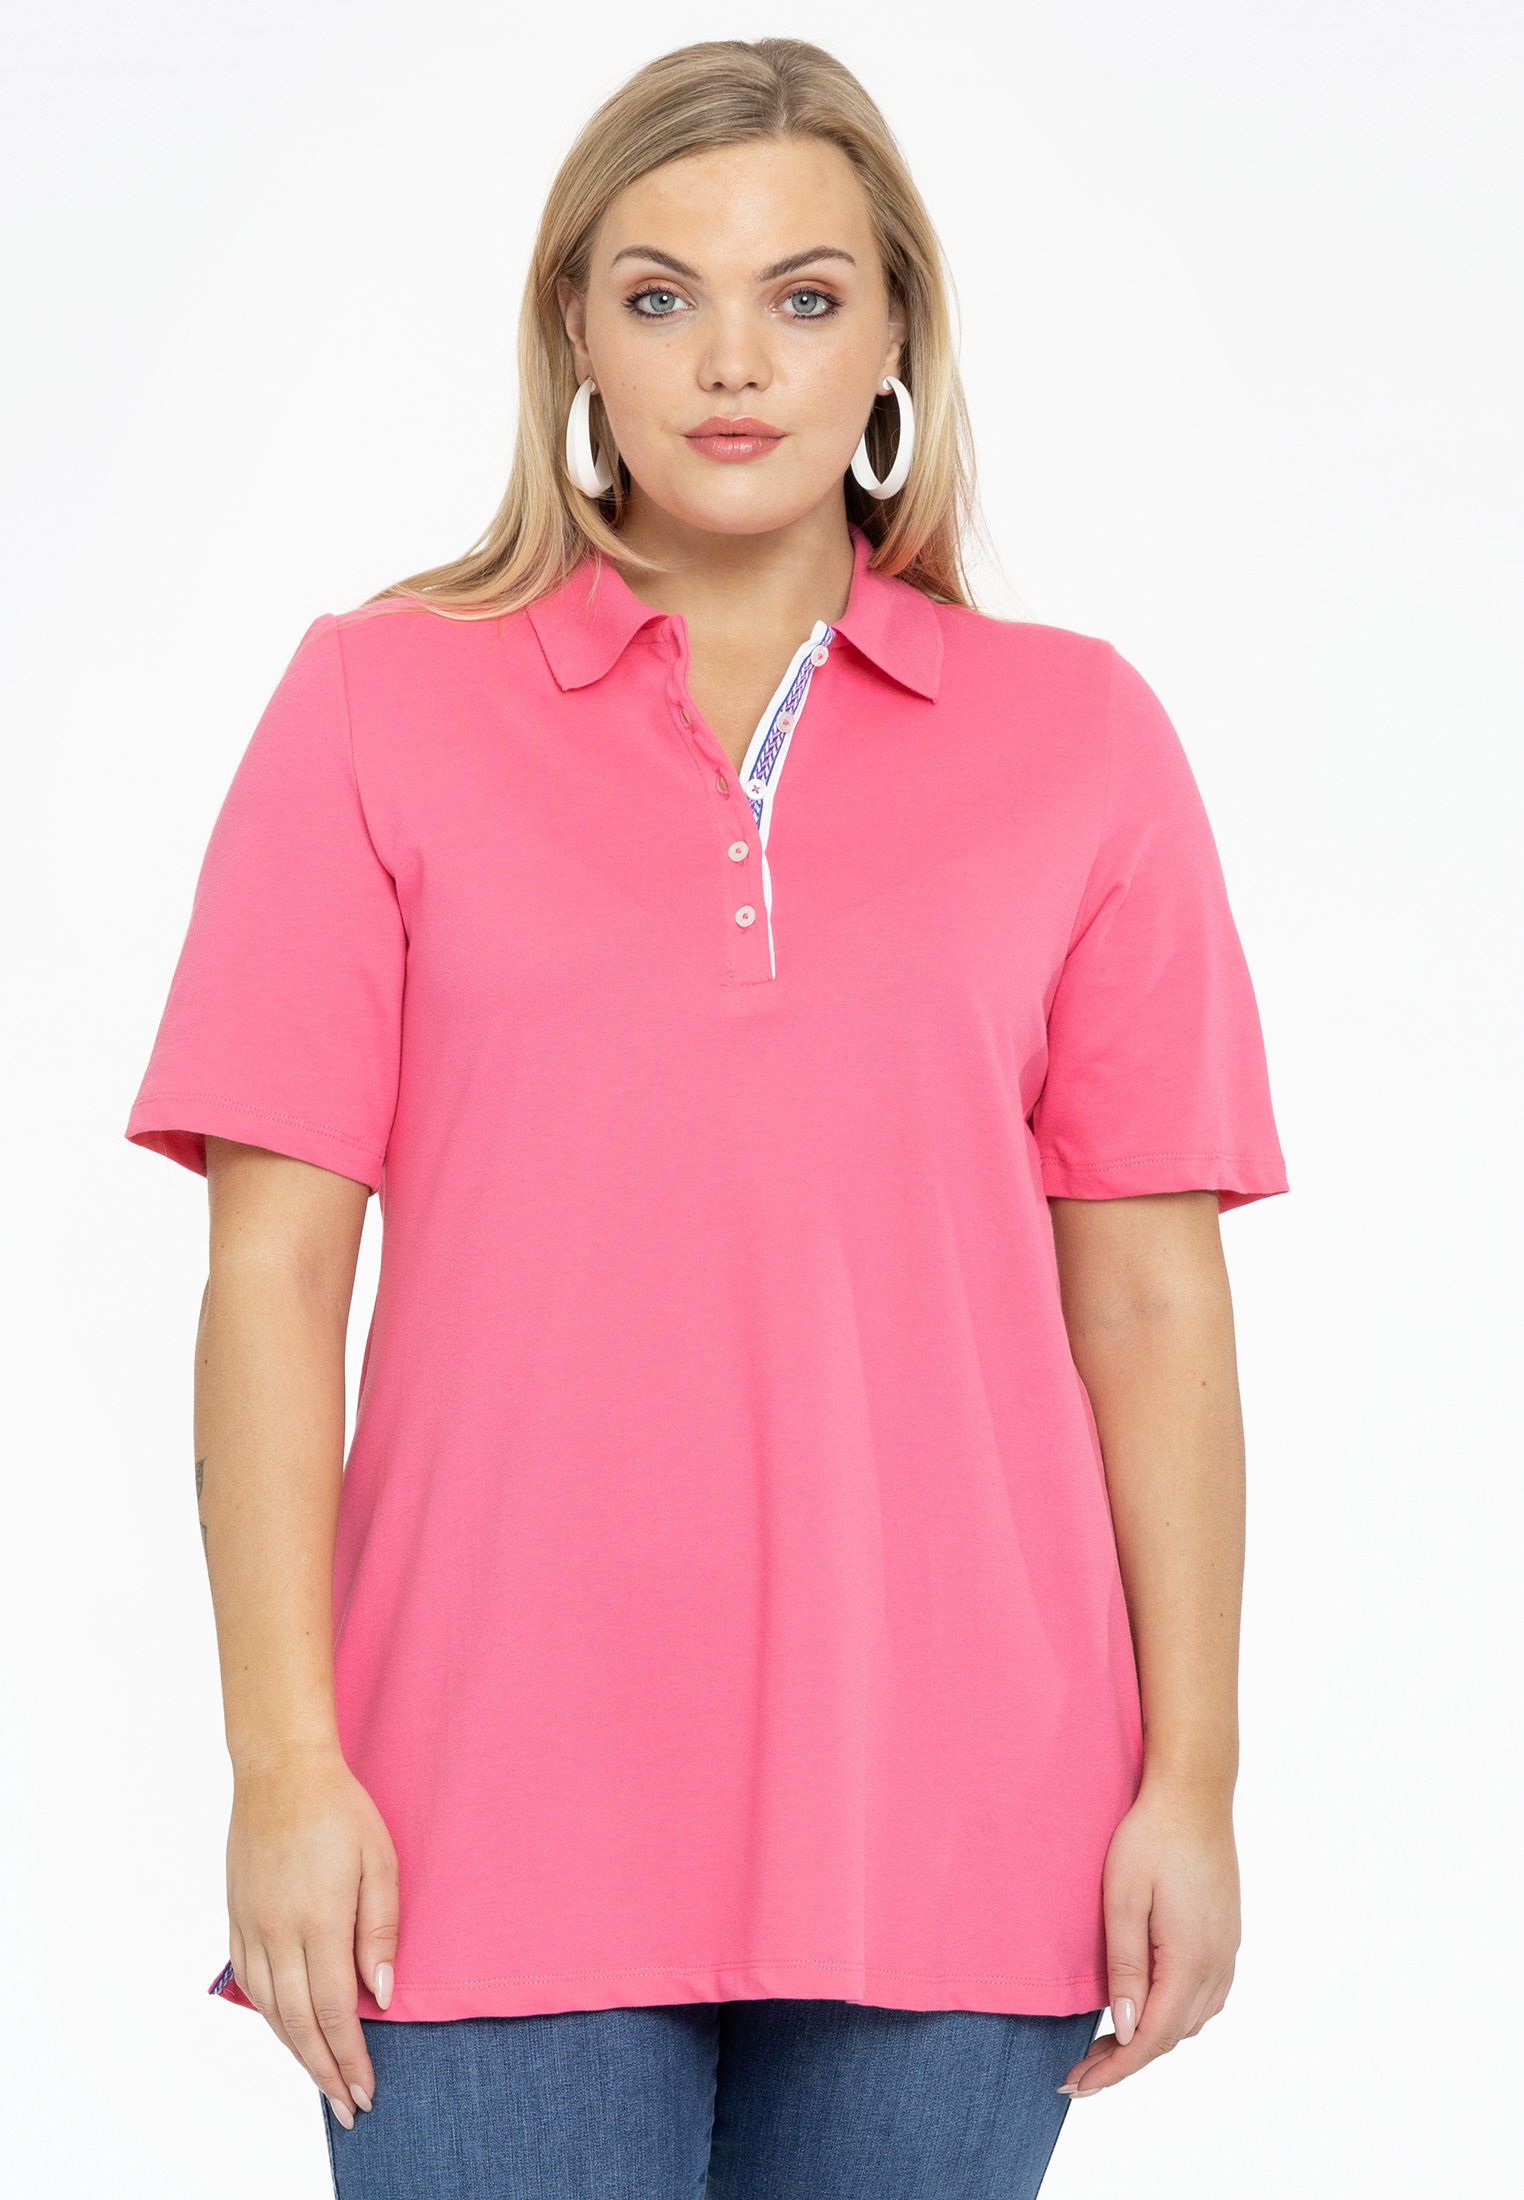 Polo-shirt flare 46/48 pink